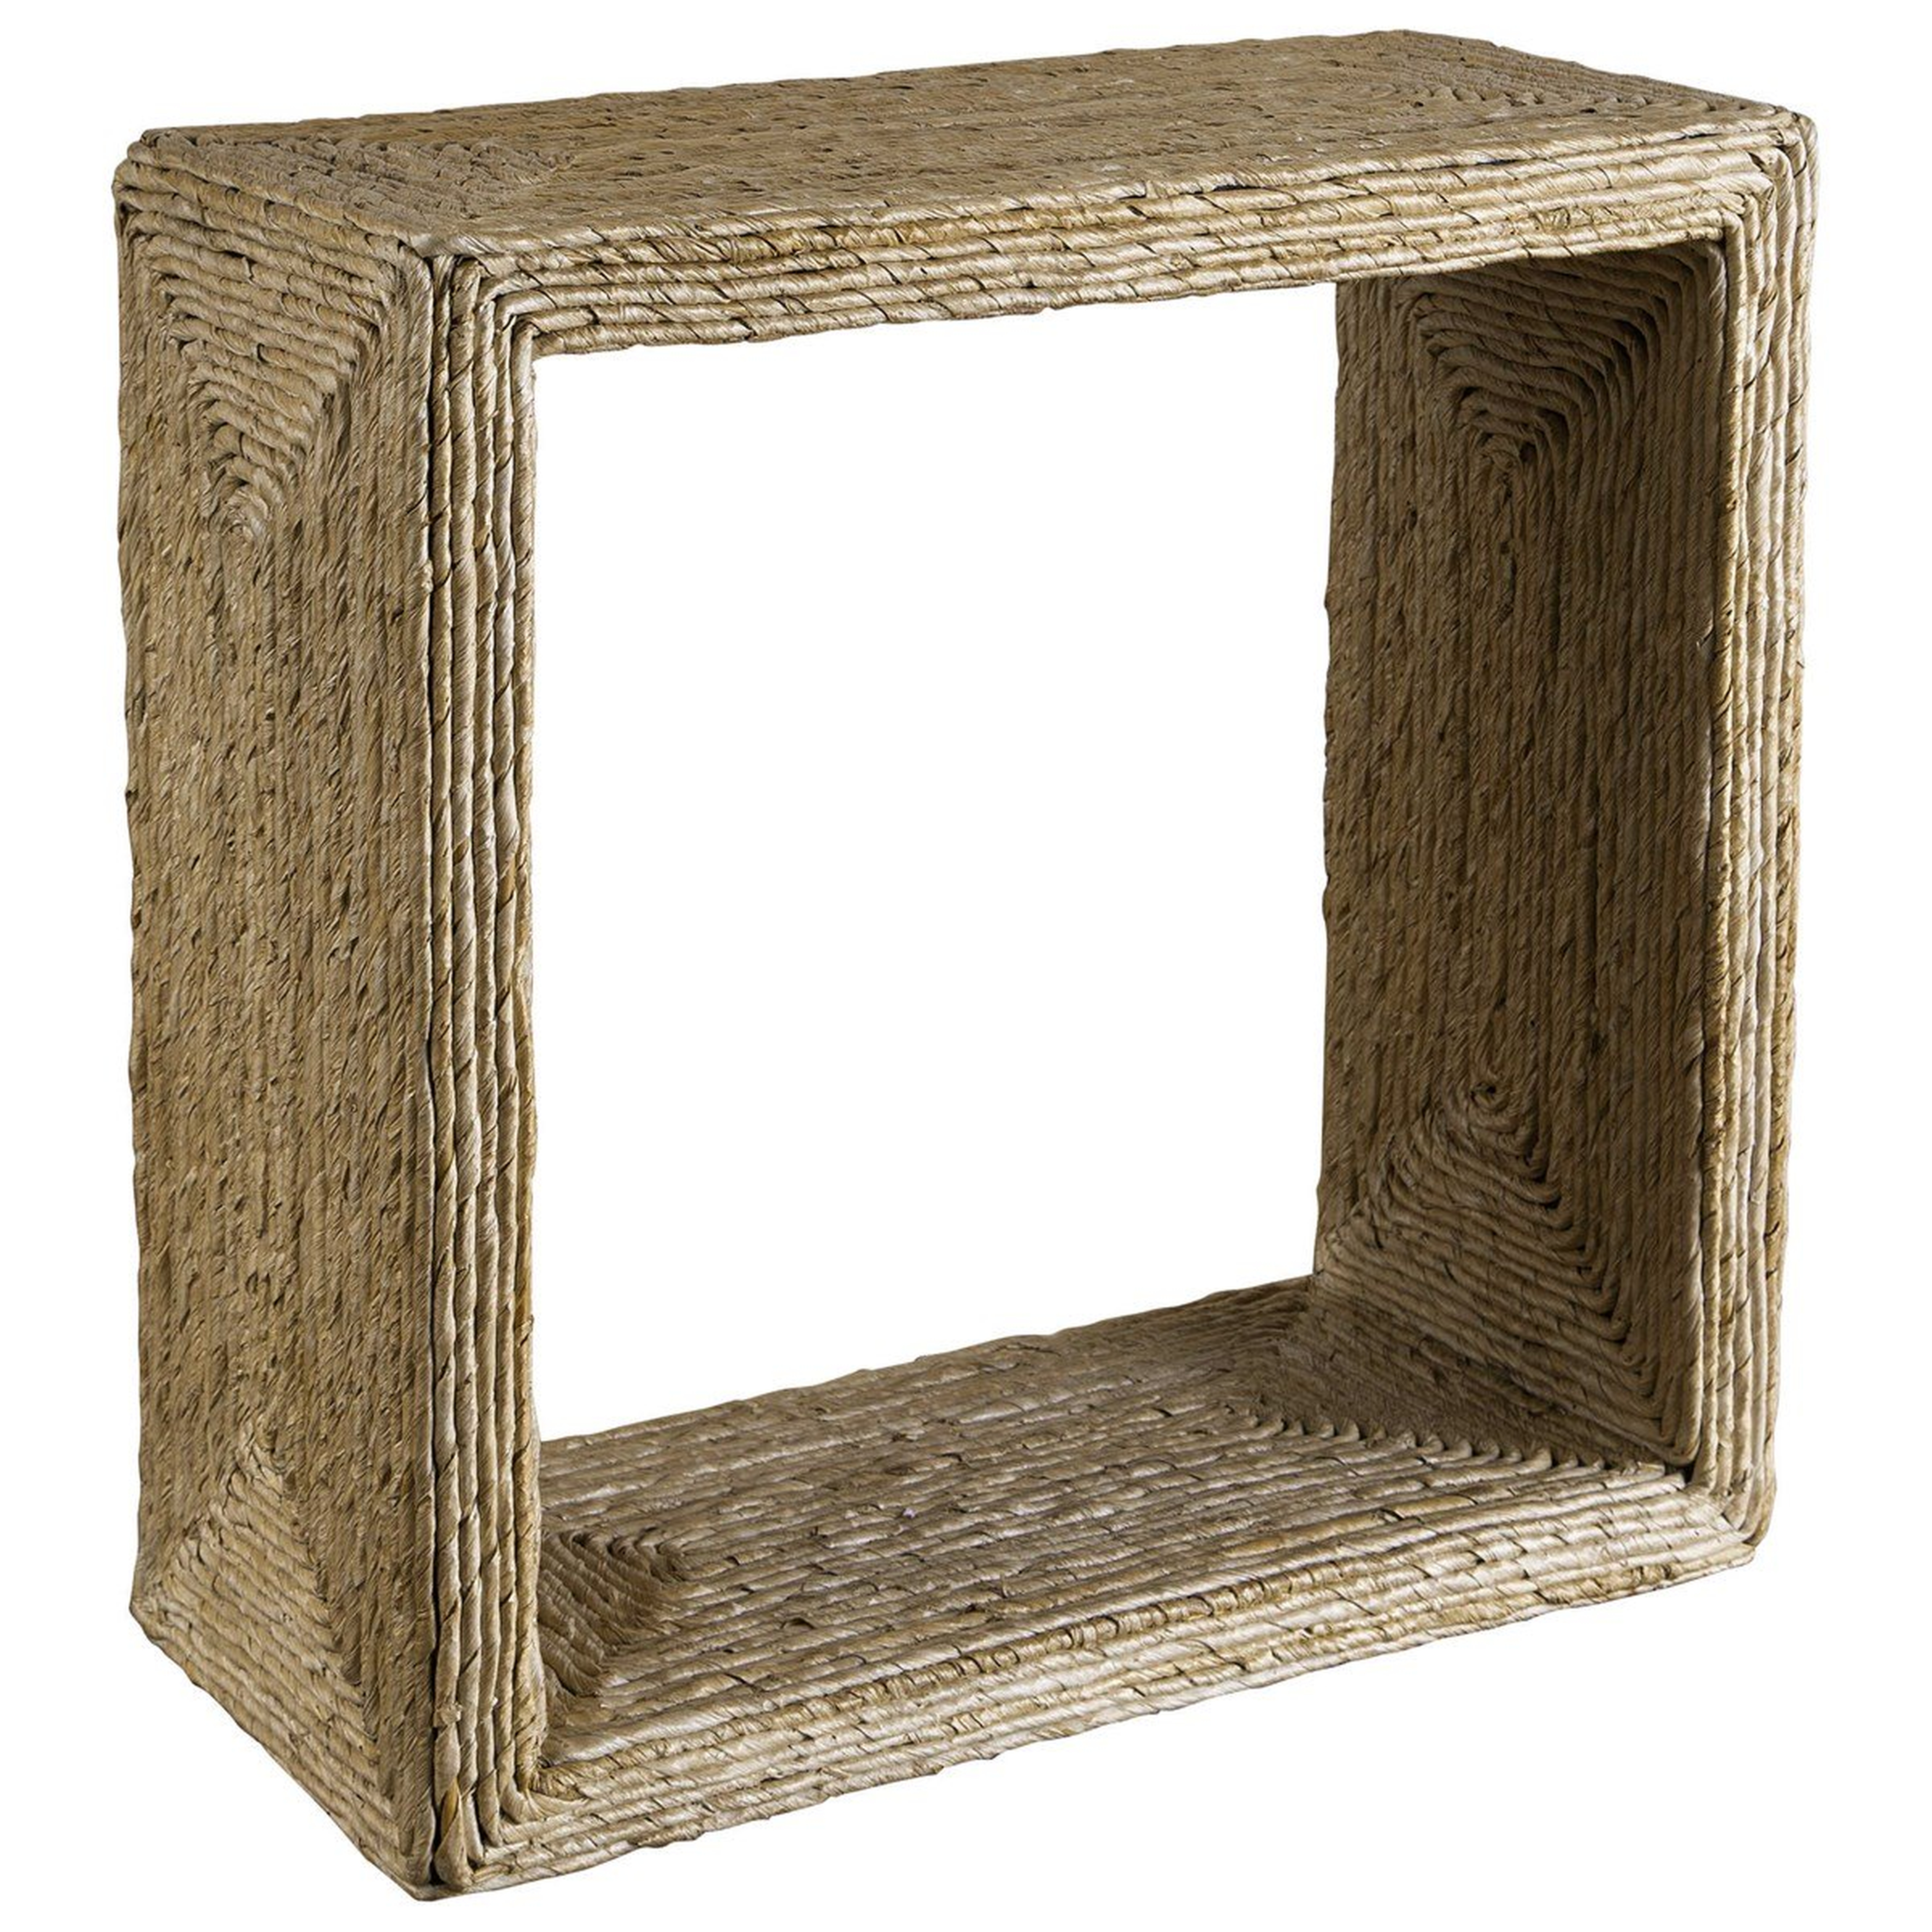 RORA SIDE TABLE - Hudsonhill Foundry